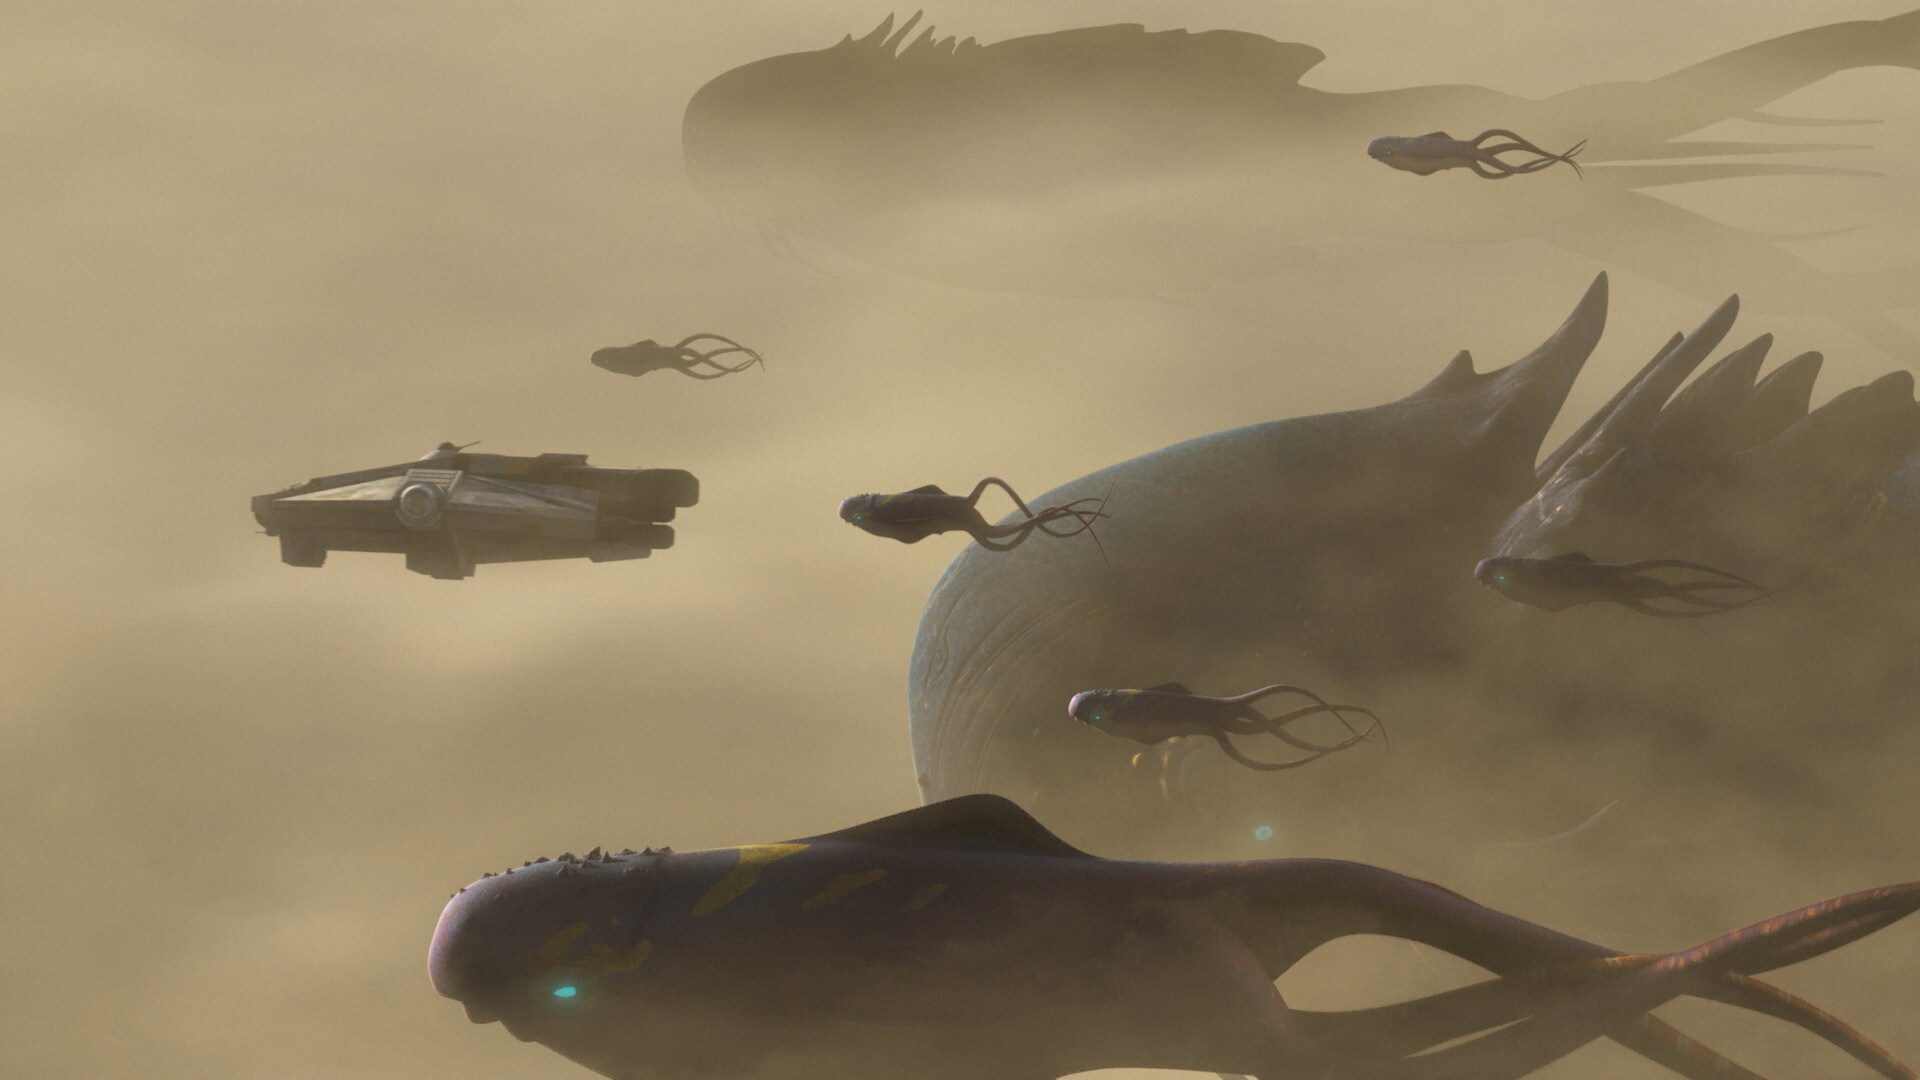 A herd of purrgil, mysterious space whales, follow the Ghost through a cloud.